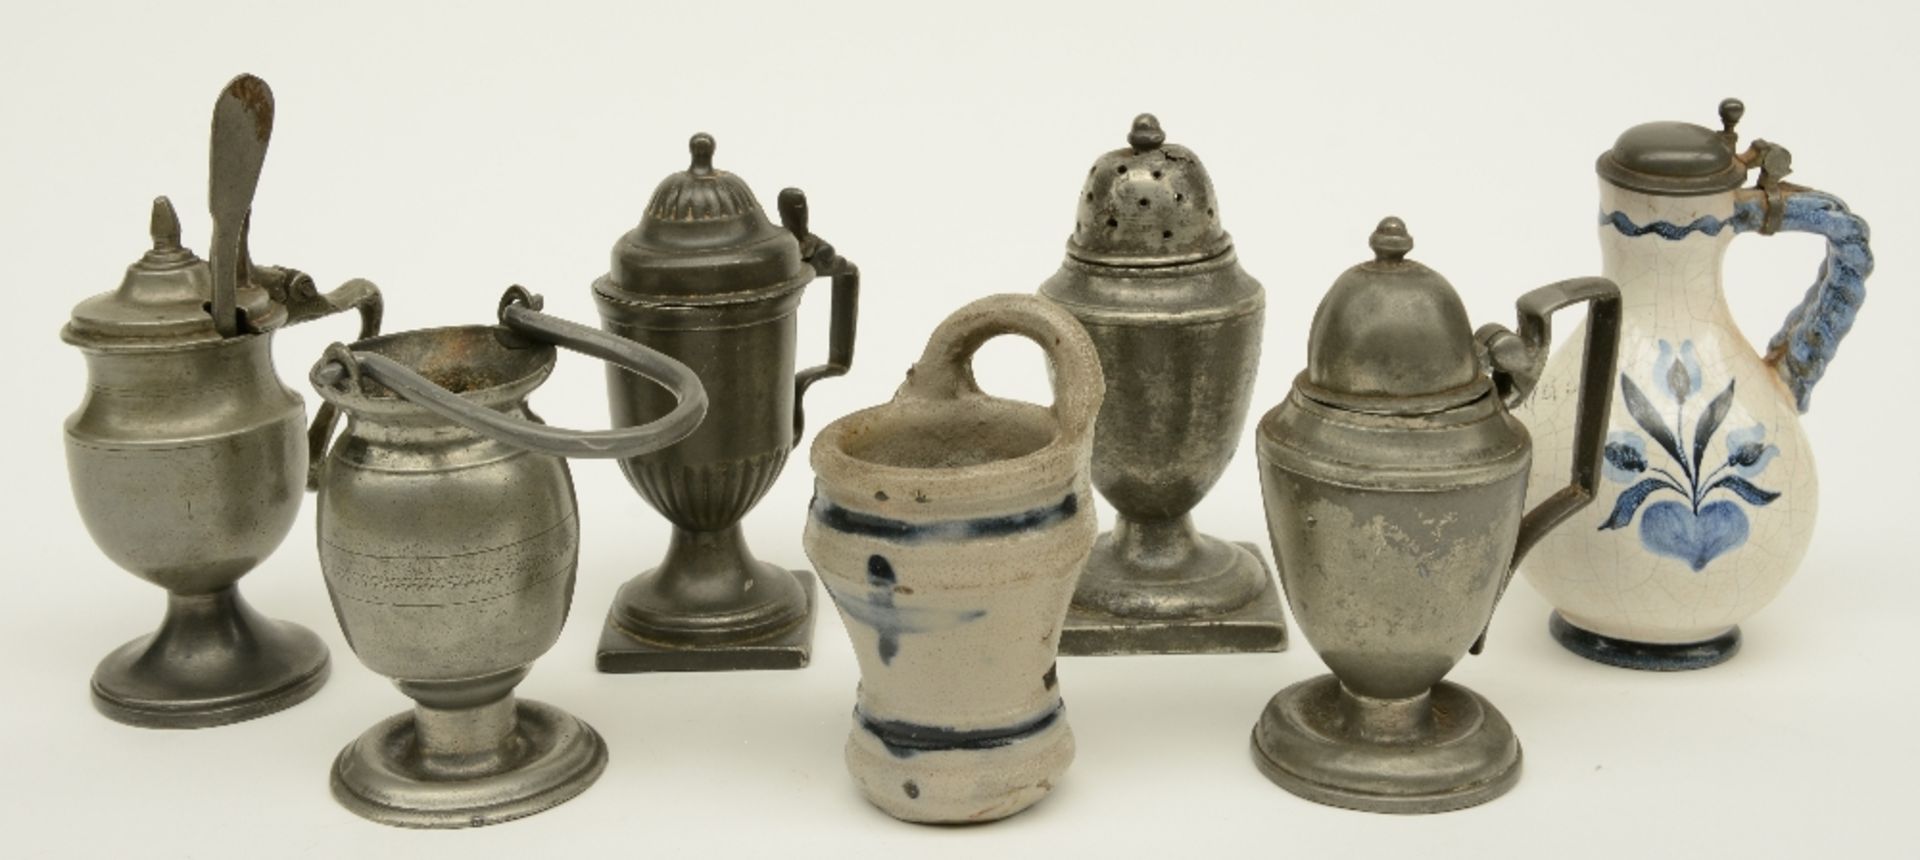 A lot: three pewter mustard pots, a caster and a Holy Water font, some marked, 18thC; added a